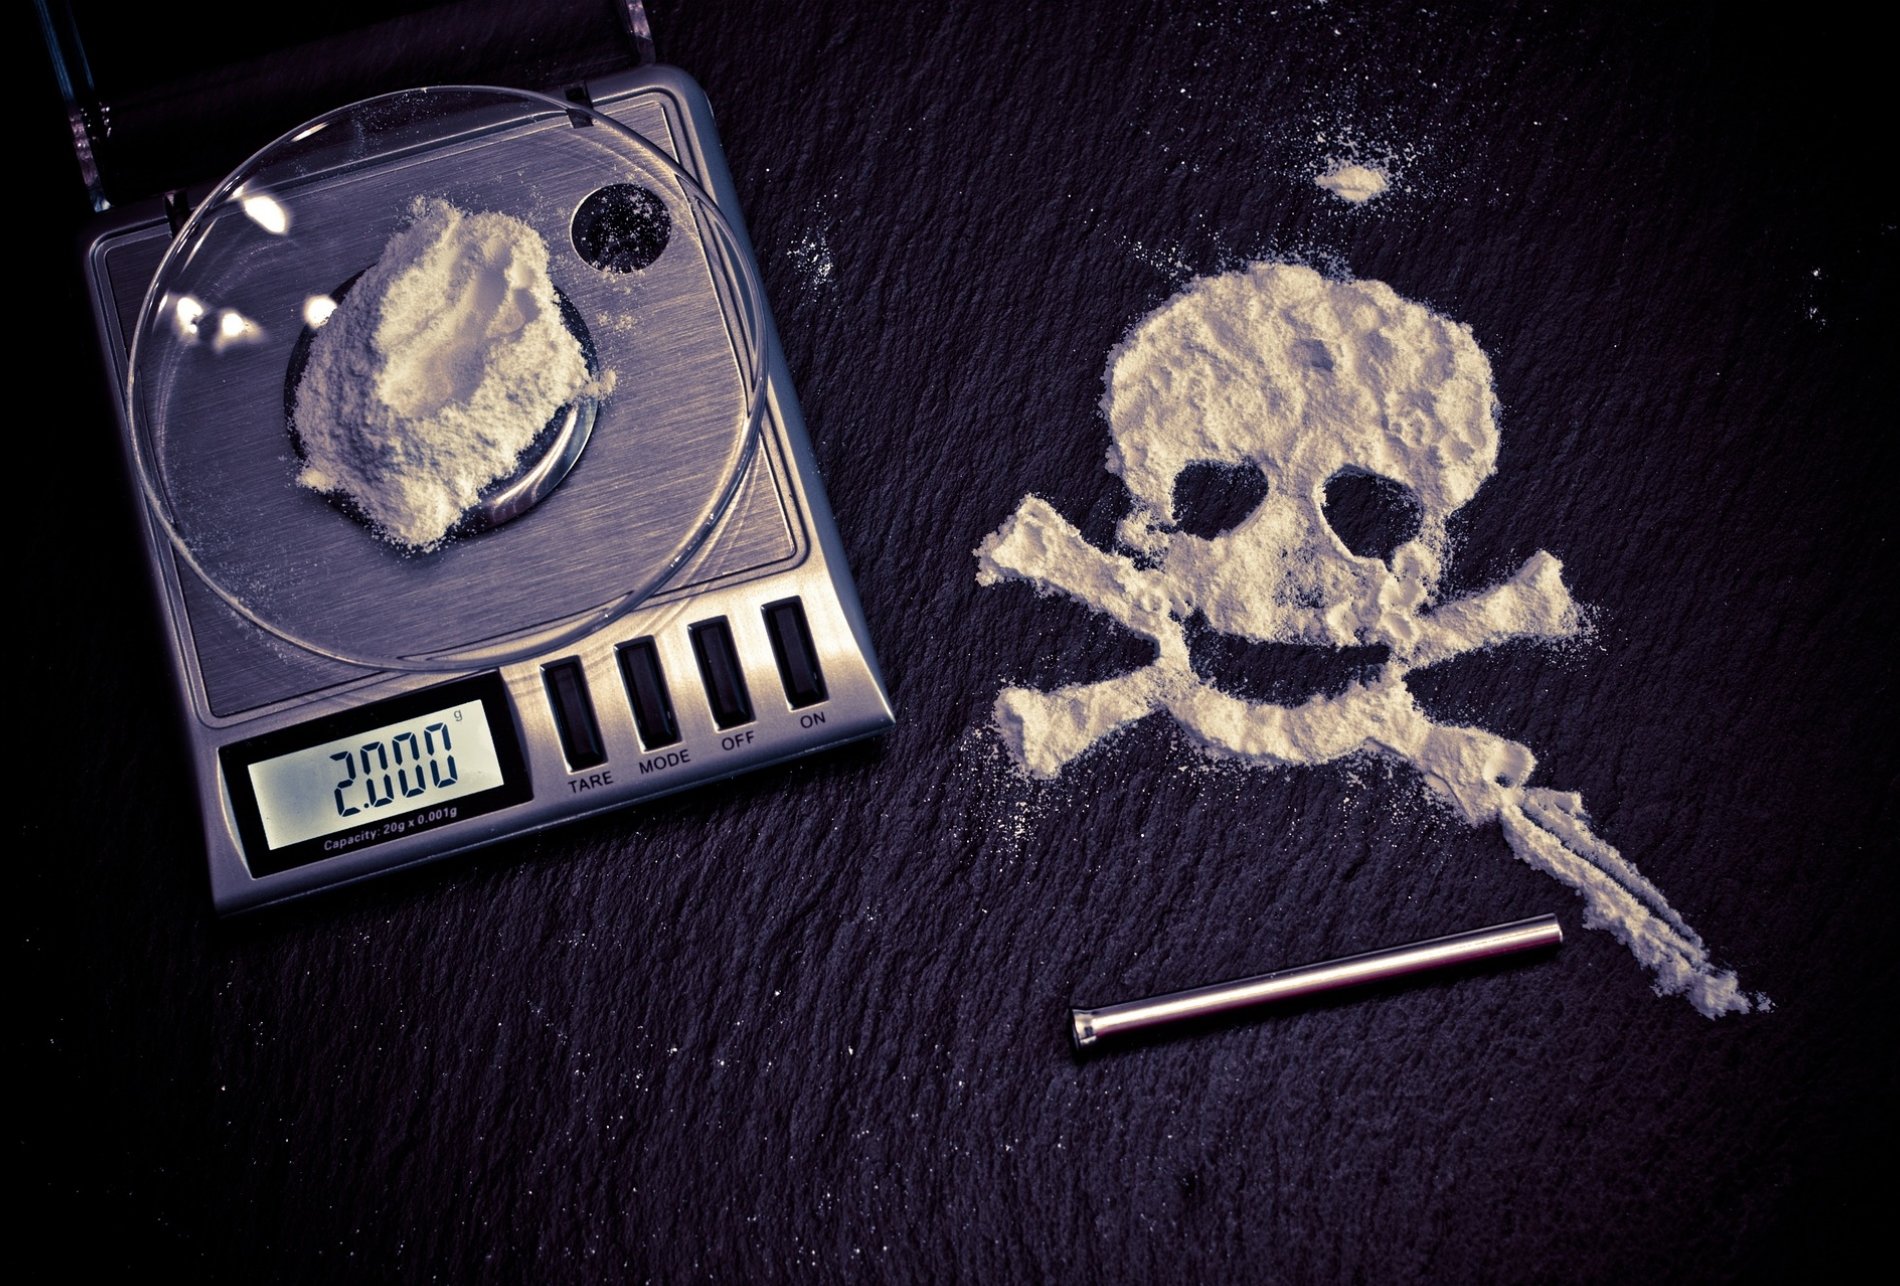 powdered drugs in the shape of skull makes people think about how fentanyl is killing americans